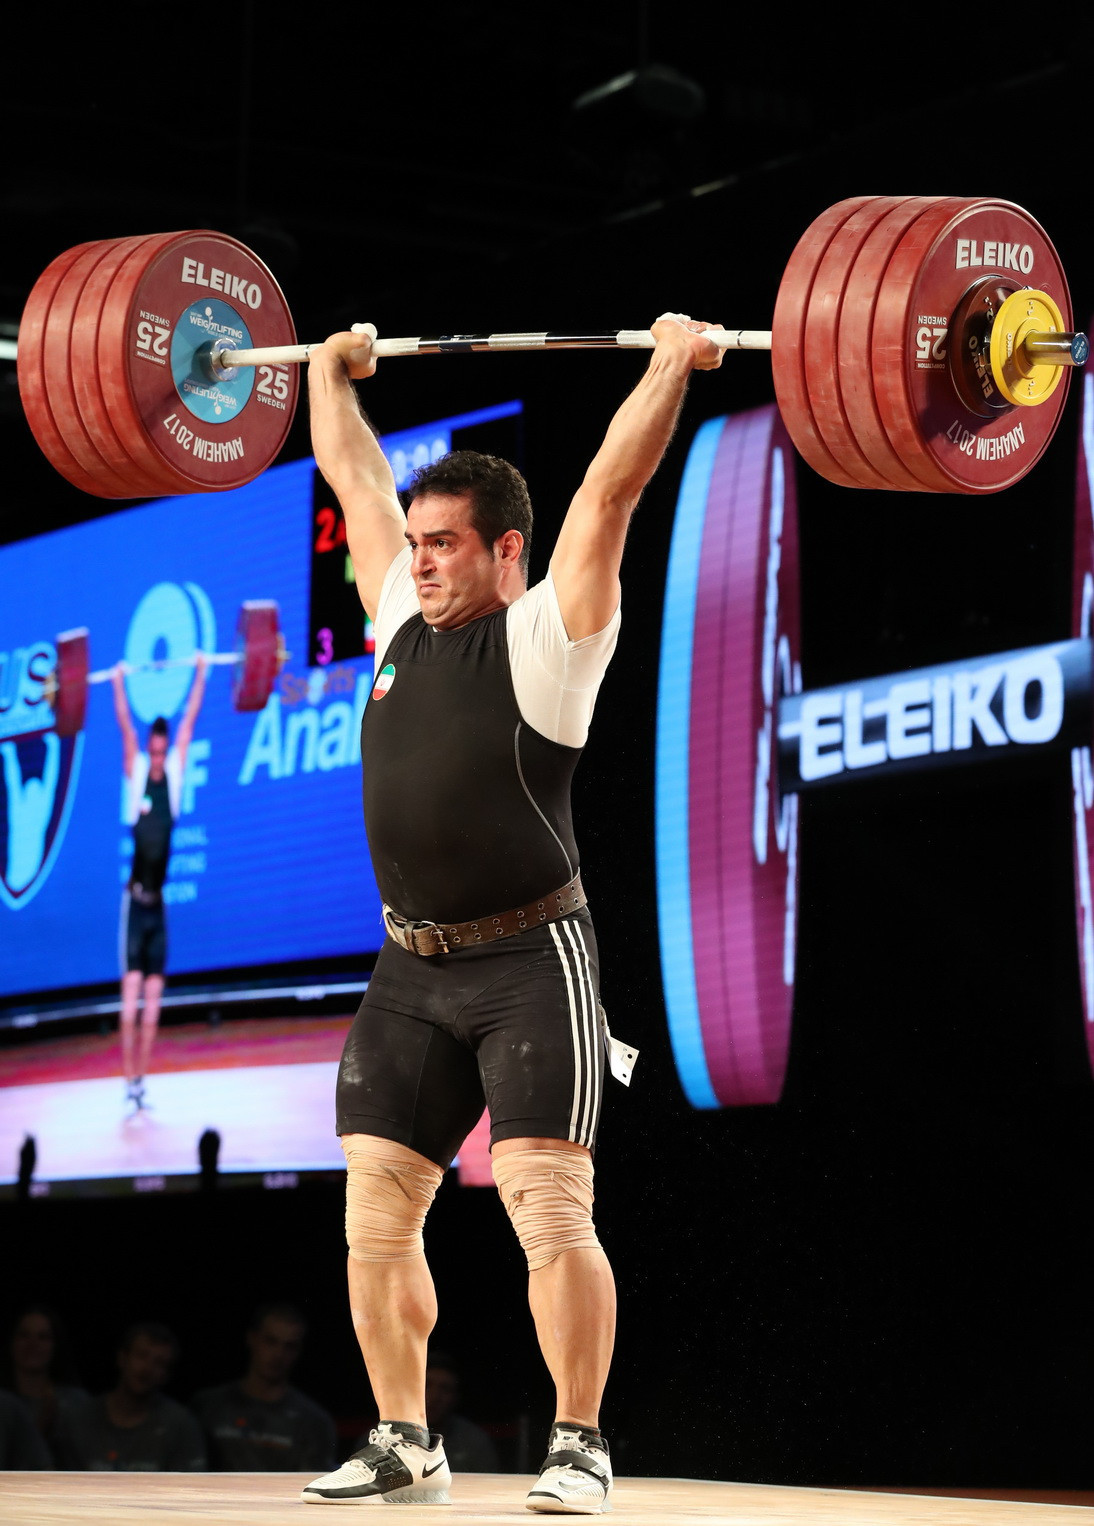 Moradi managed 233kg in the clean and jerk for a total of 417kg ©IWF